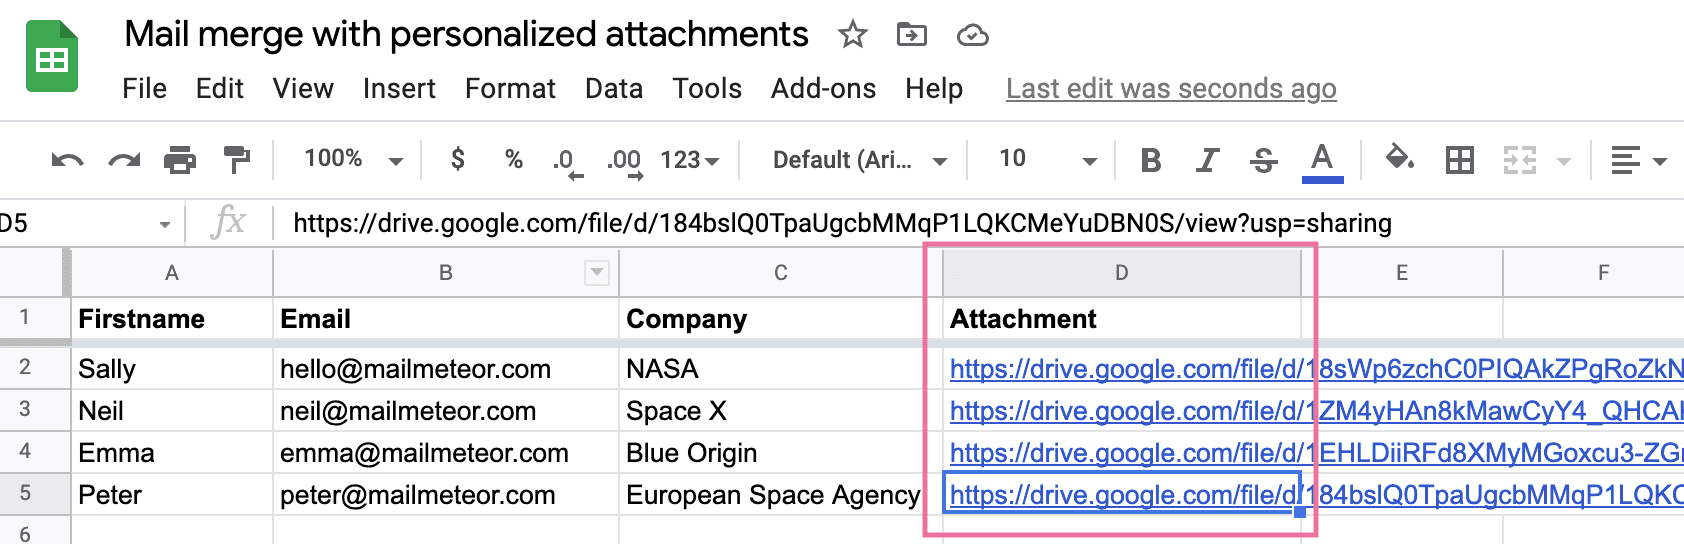 Mail merge with attachments in Google Sheeets